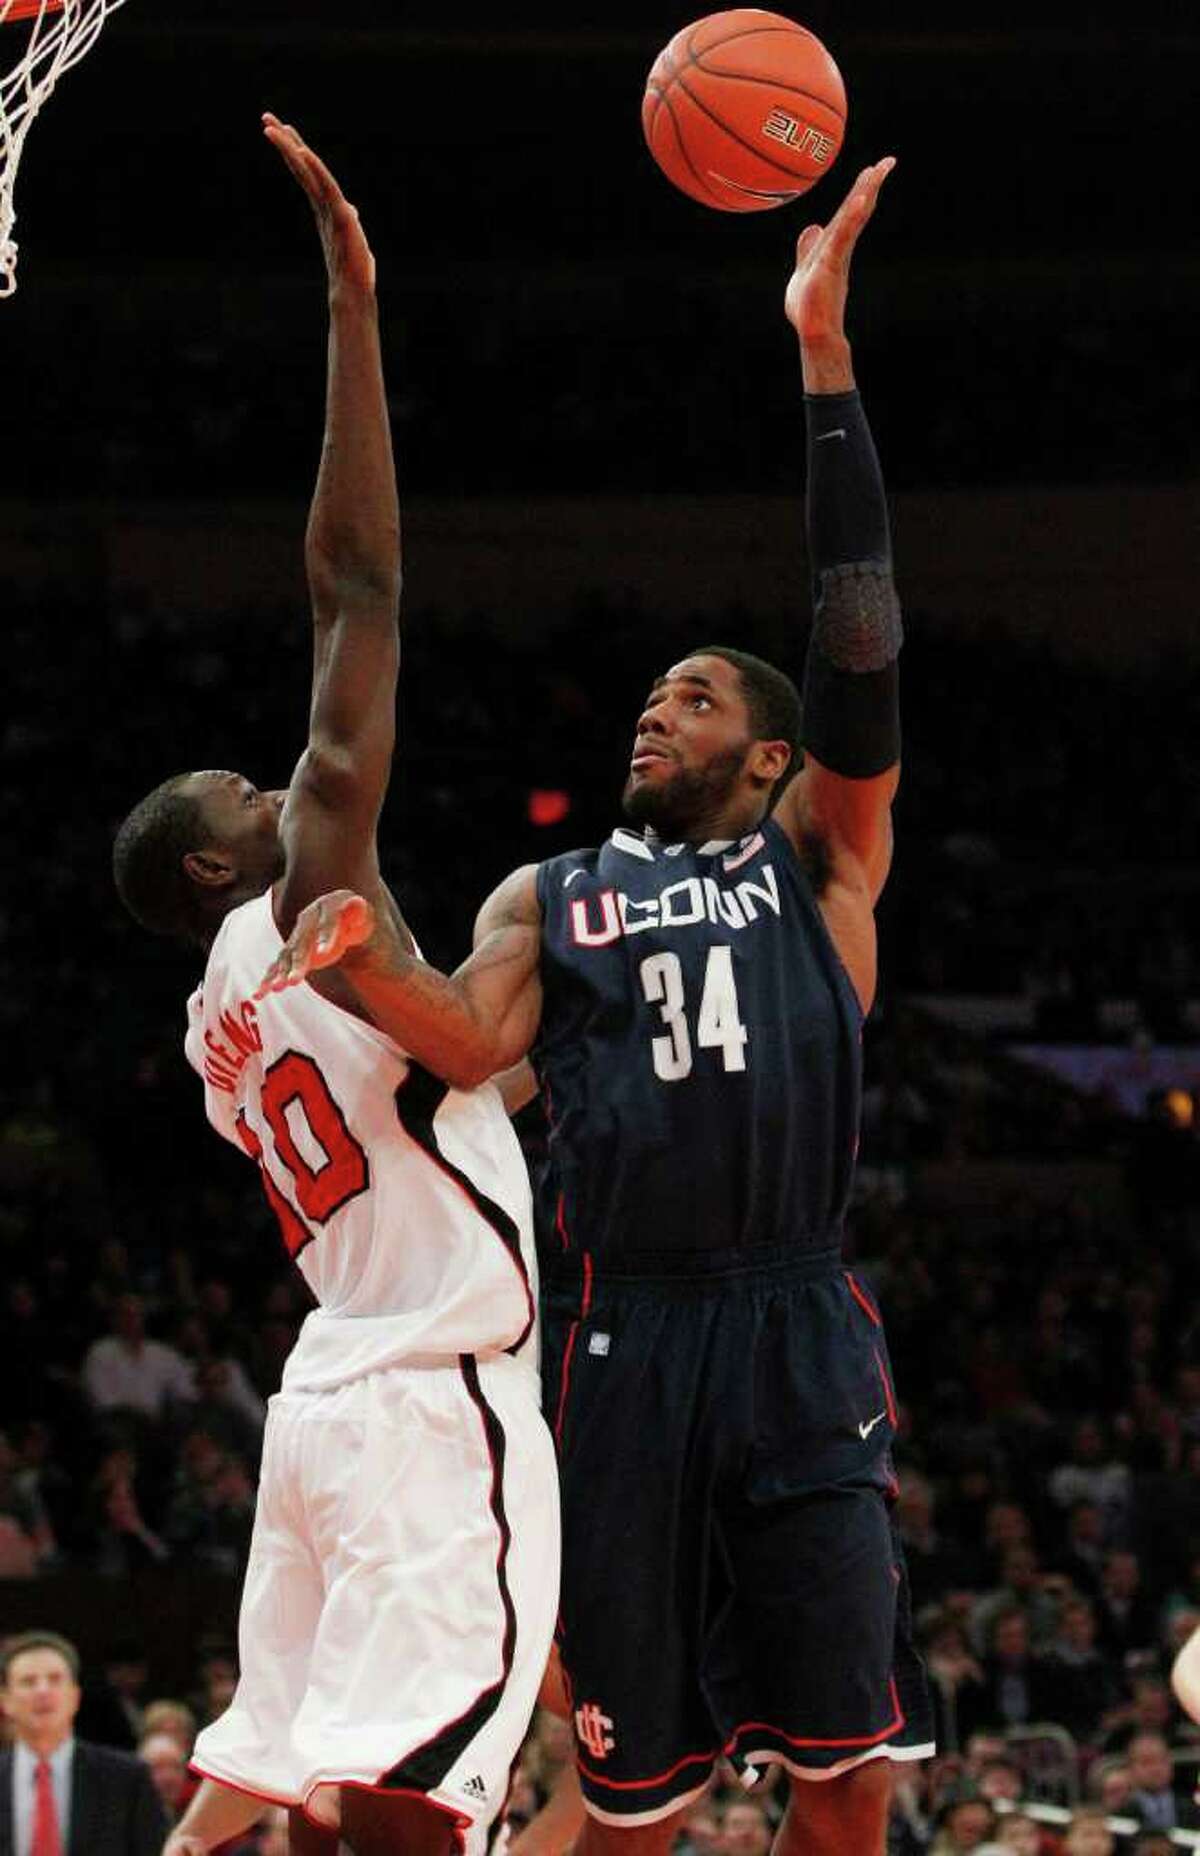 Connecticut's Alex Oriakhi (34) shoots over Louisville's Gorgui Dieng (10) during the first half of an NCAA college basketball game at the Big East Championship ,Saturday, March 12, 2011, in New York. (AP Photo/Frank Franklin II)